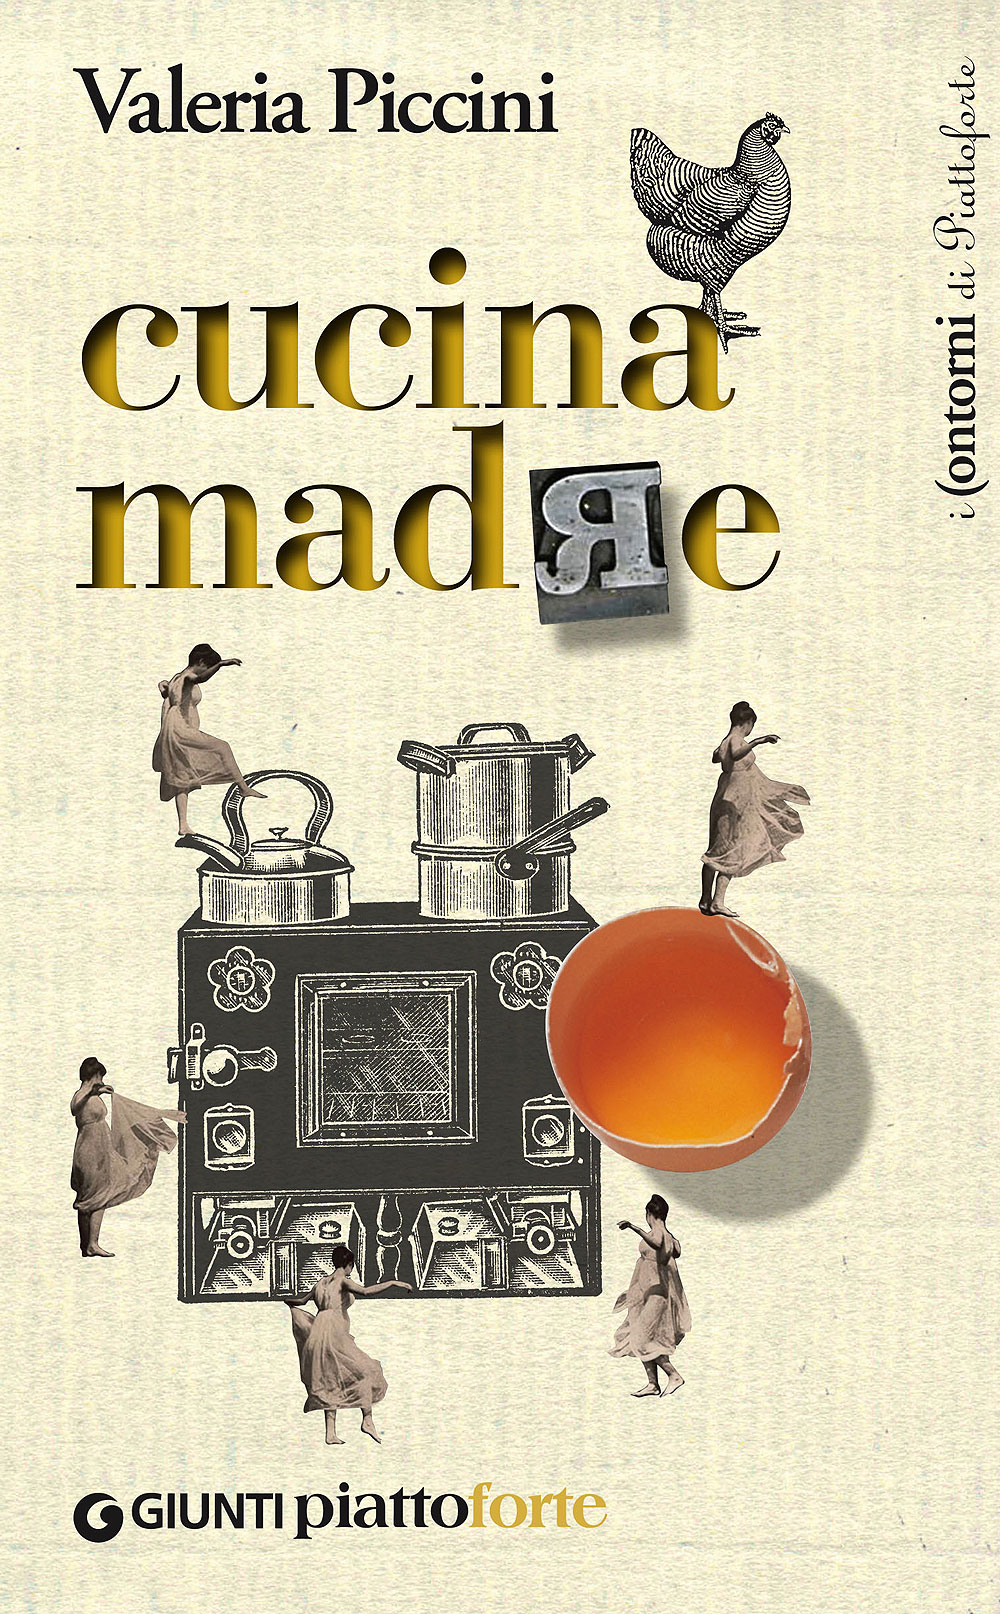 Image of Cucina madre